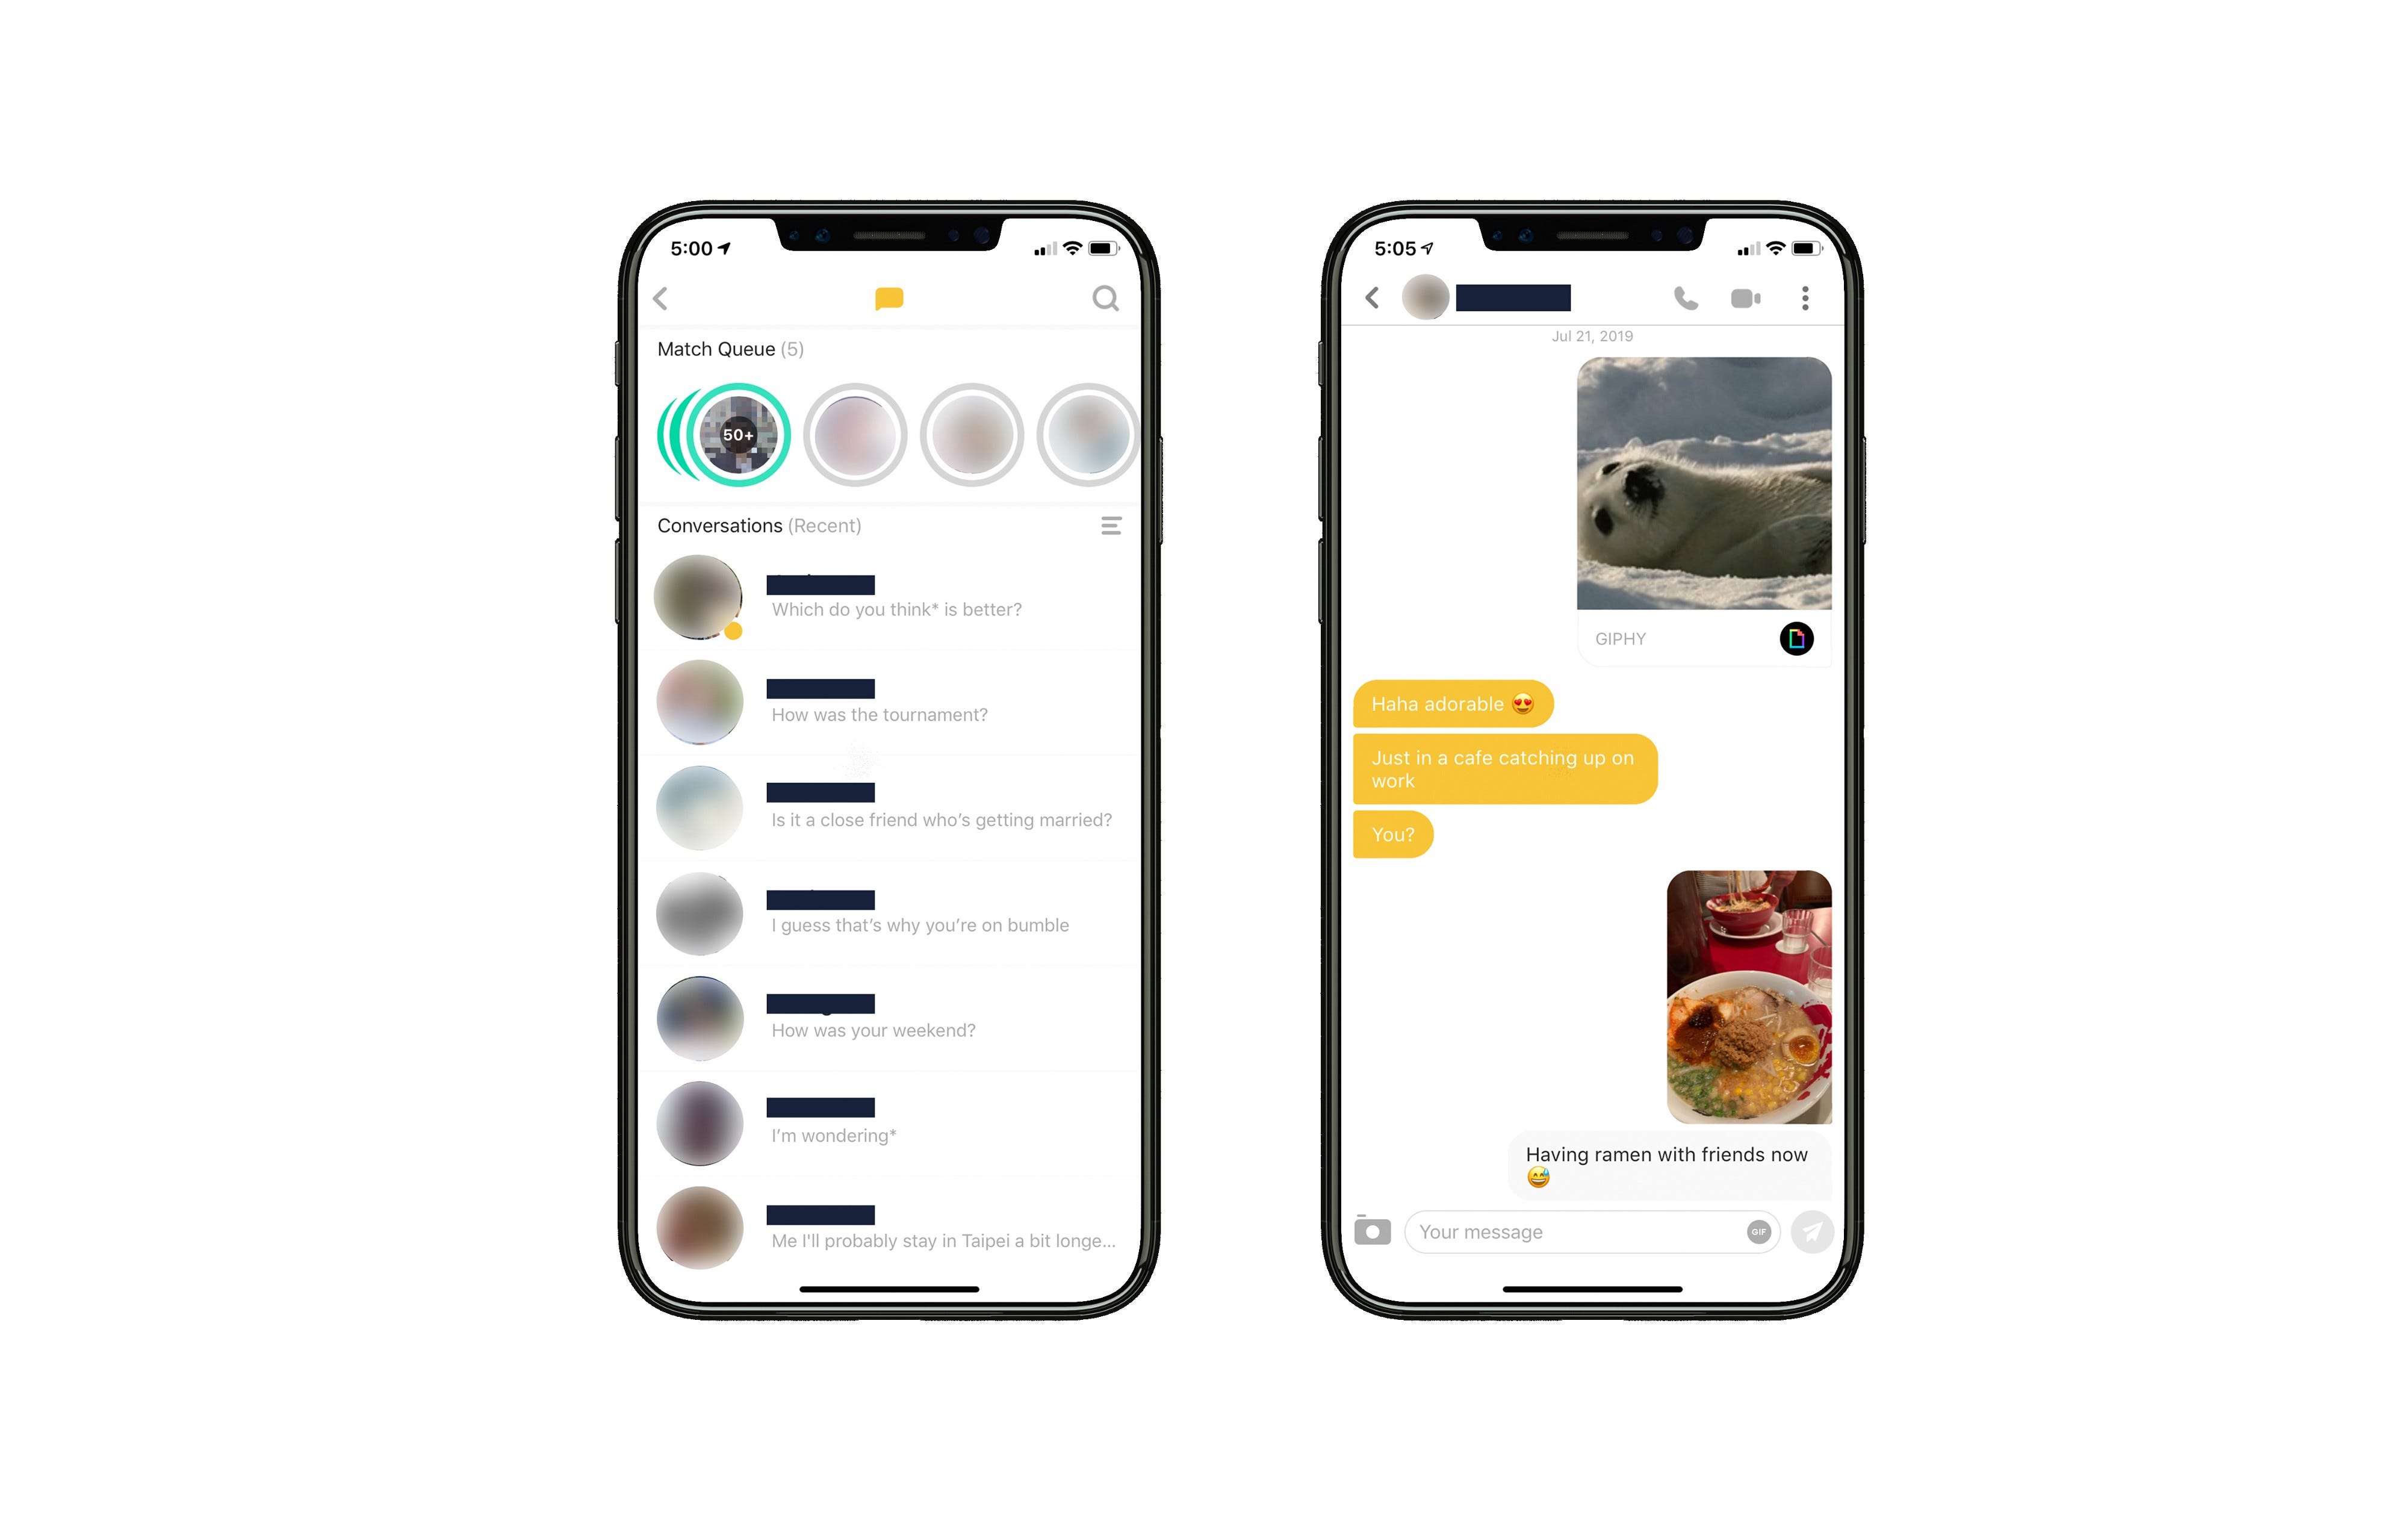 You can not only send photos on Bumble, but also make audio calls and even video calls!